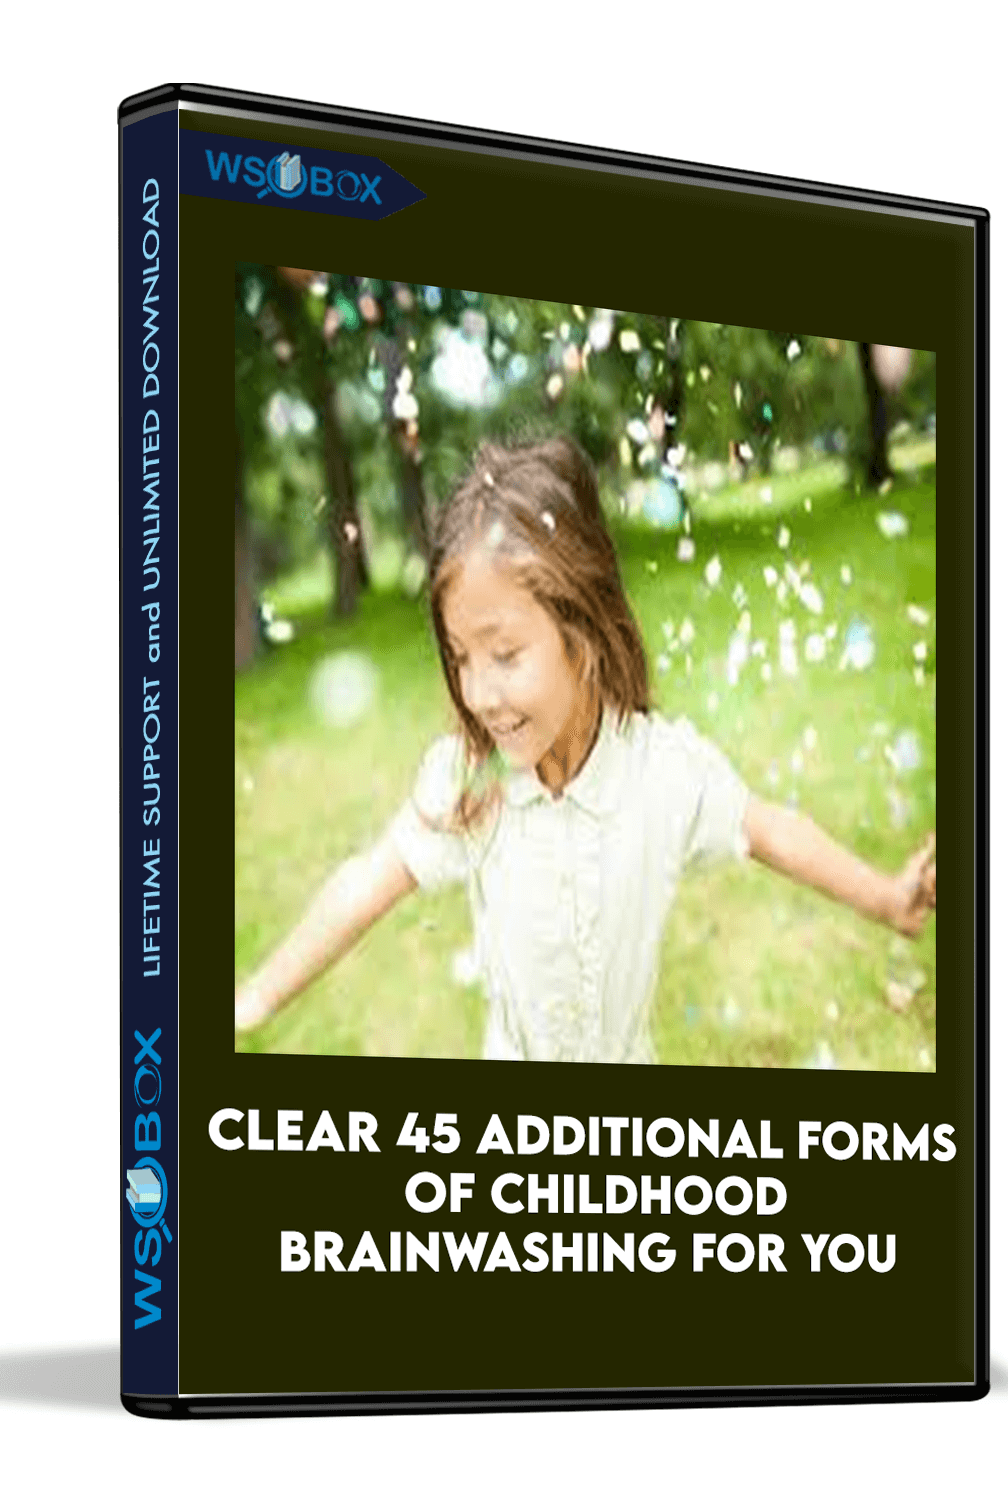 Clear 45 Additional Forms of Childhood Brainwashing for you and 73 Generations of your Ancestors…